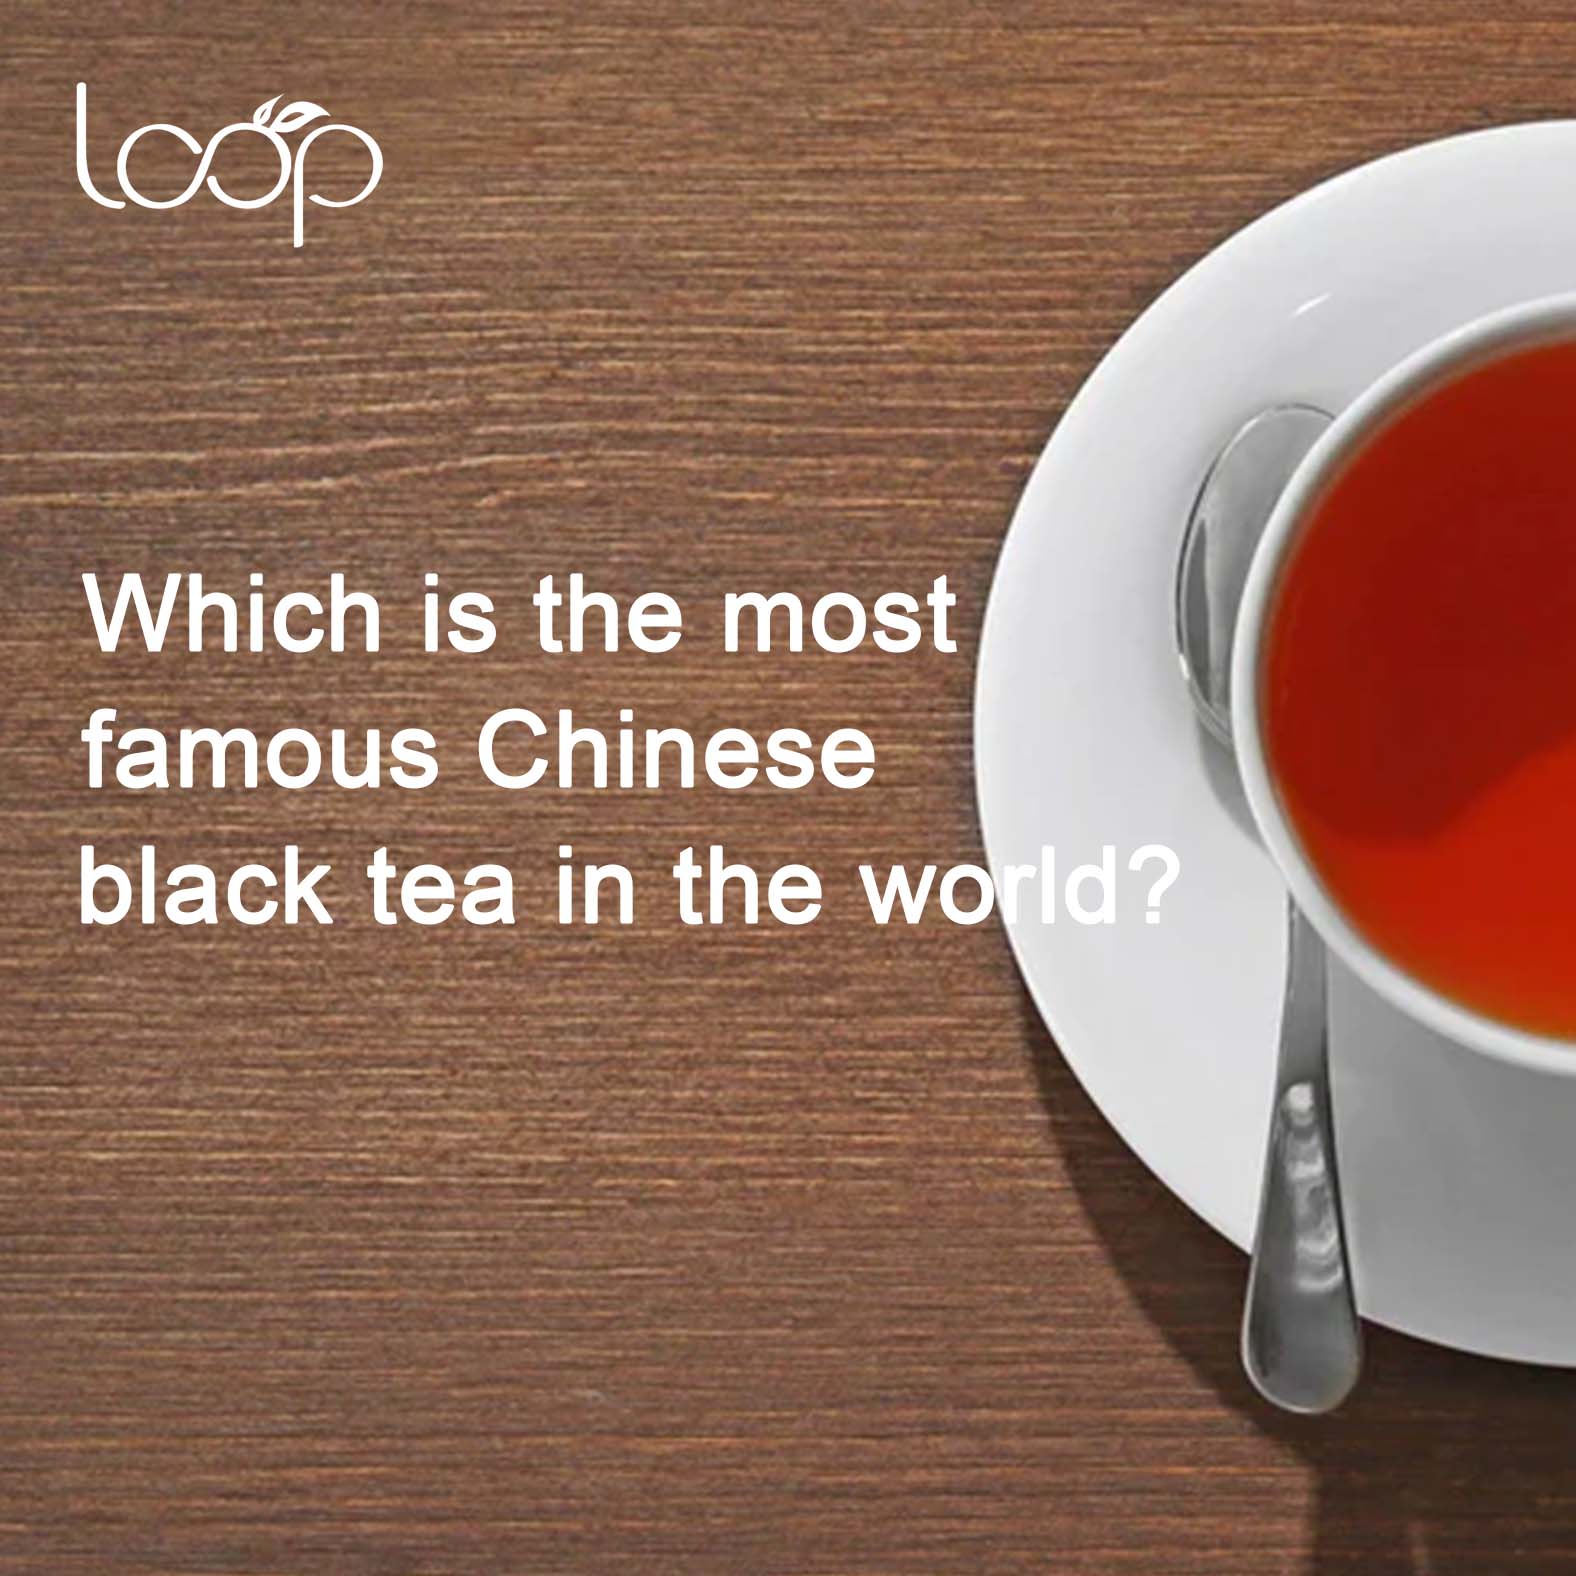 Which is the most famous Chinese black tea in the world?